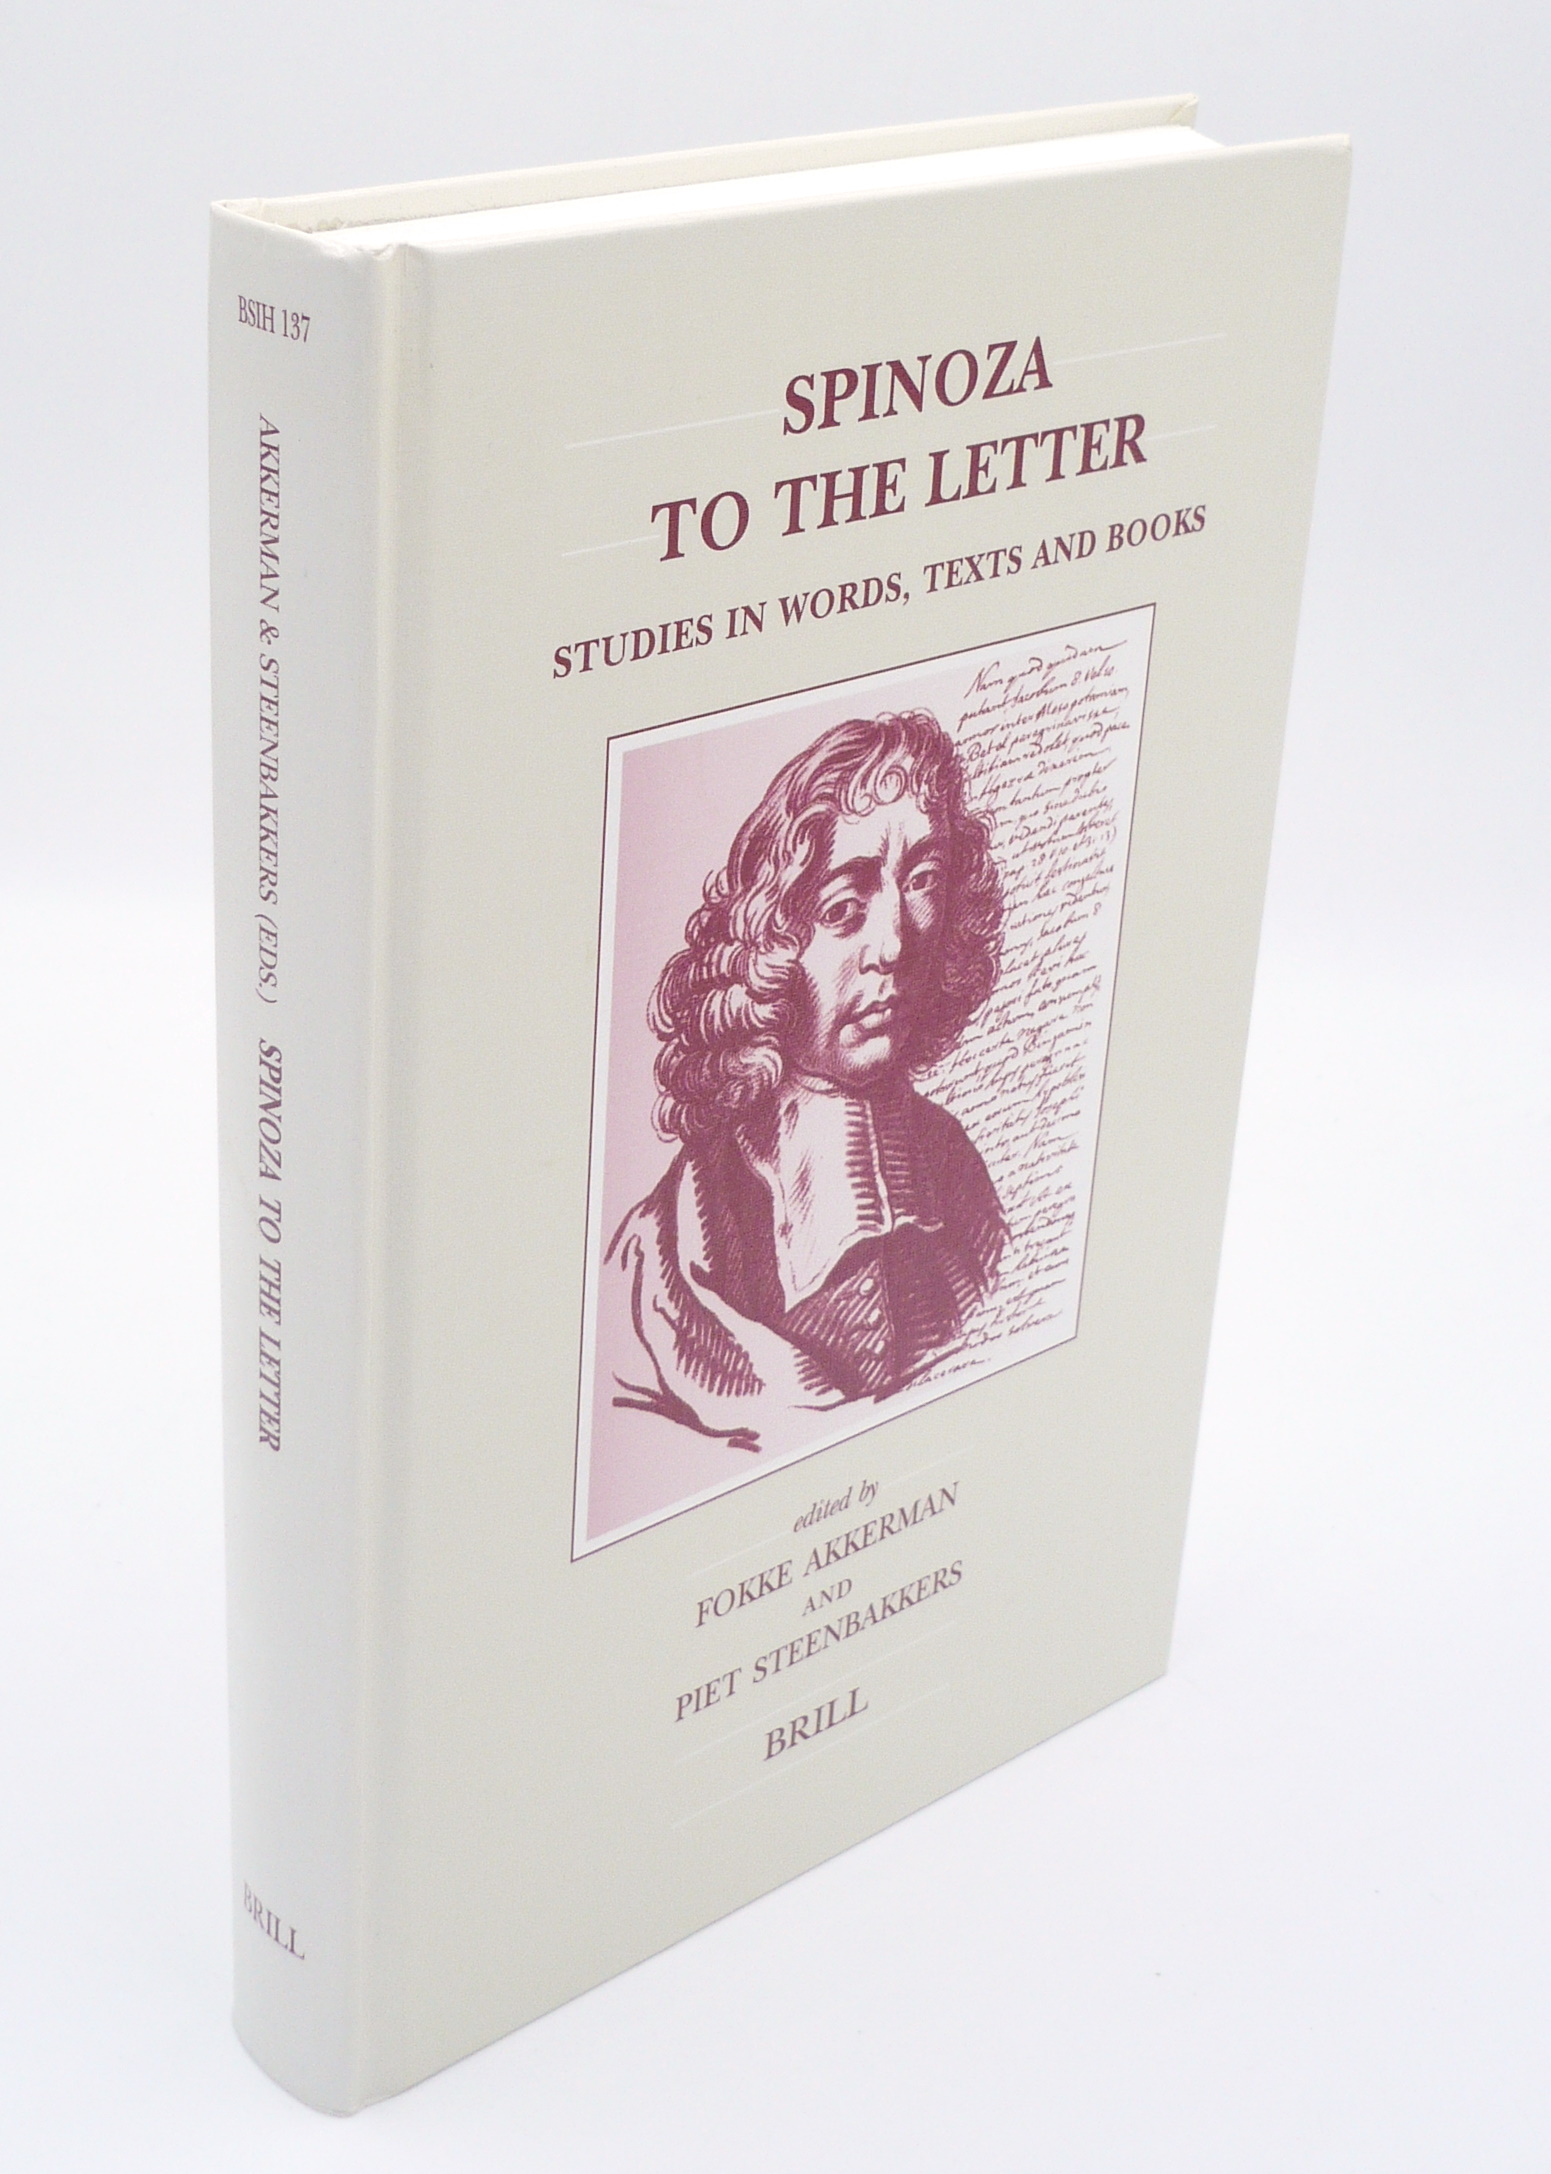 Spinoza to the Letter. Studies in Words, Texts And Books (Brill's Studies in Intellectual History, 137) - Fokke Akkerman and Piet Steenbakkers (eds)